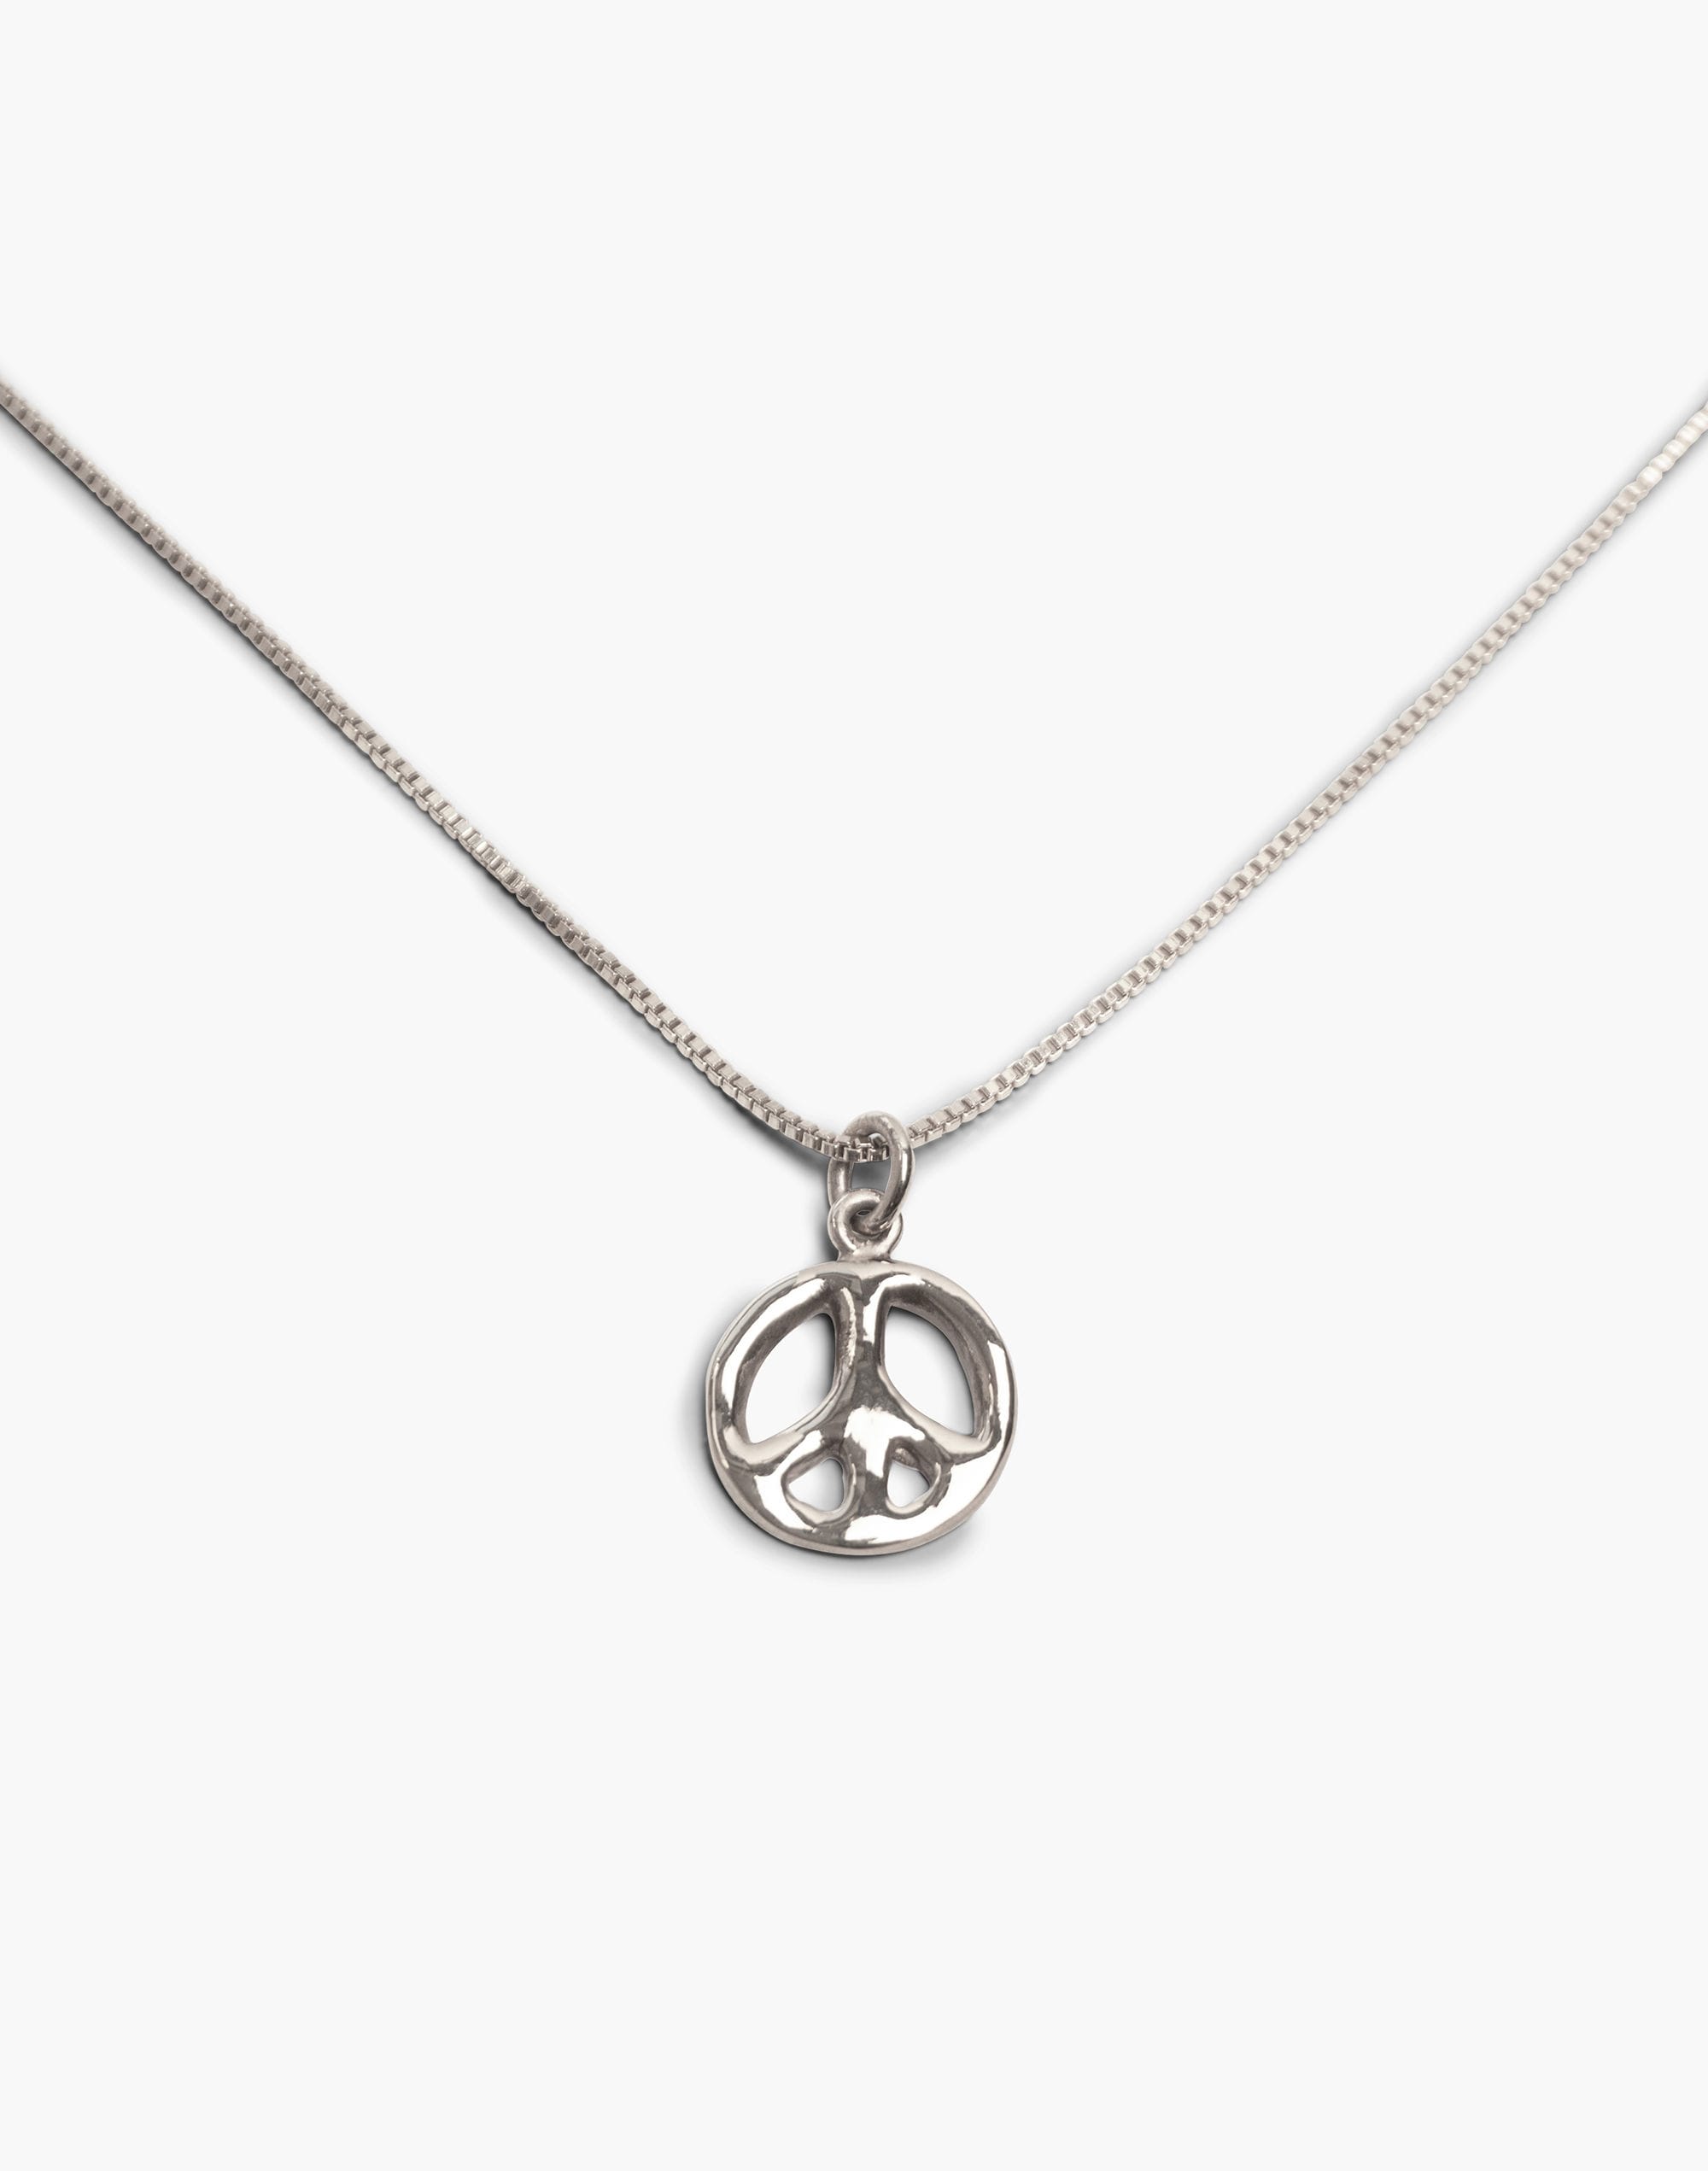 CHARLOTTE CAUWE STUDIO 1969 Peace Sign Necklace in Gold